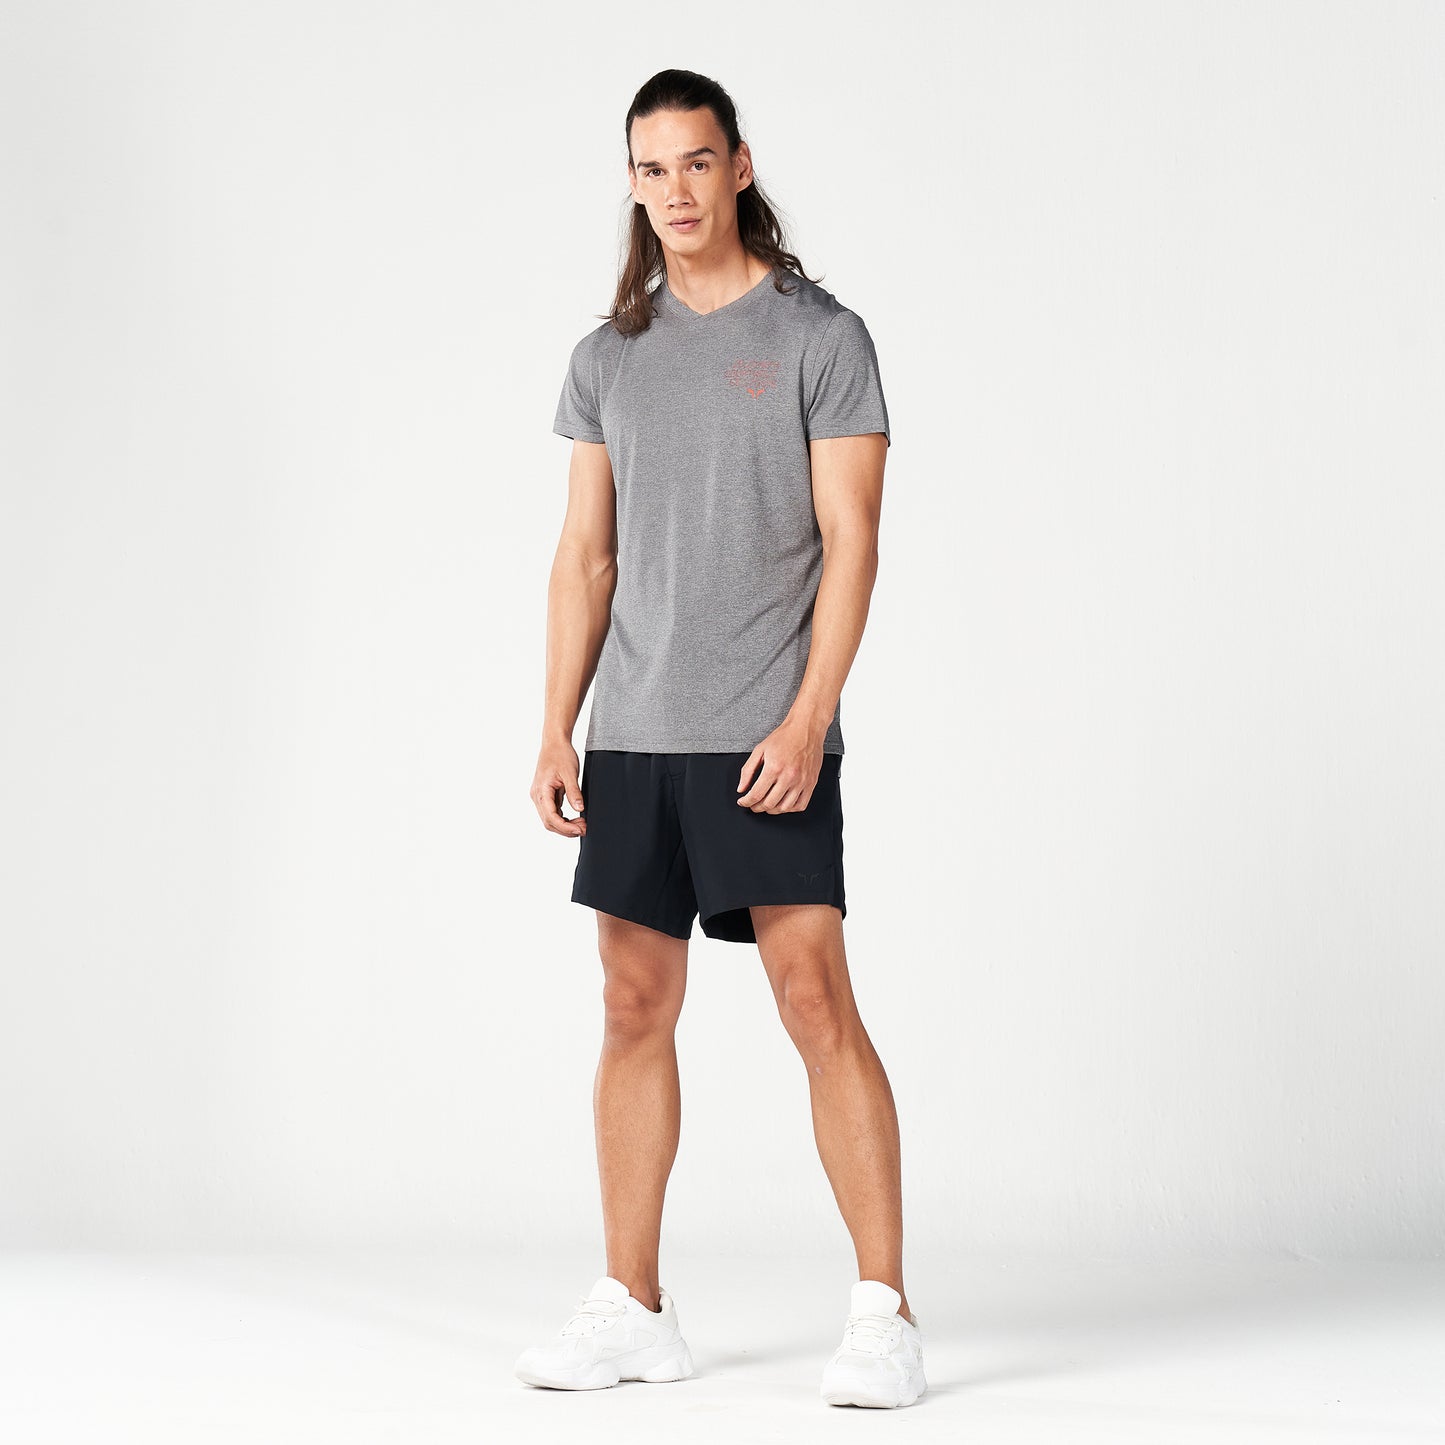 squatwolf-gym-wear-code-v-neck-muscle-tee-grey-marl-workout-shirts-for-men